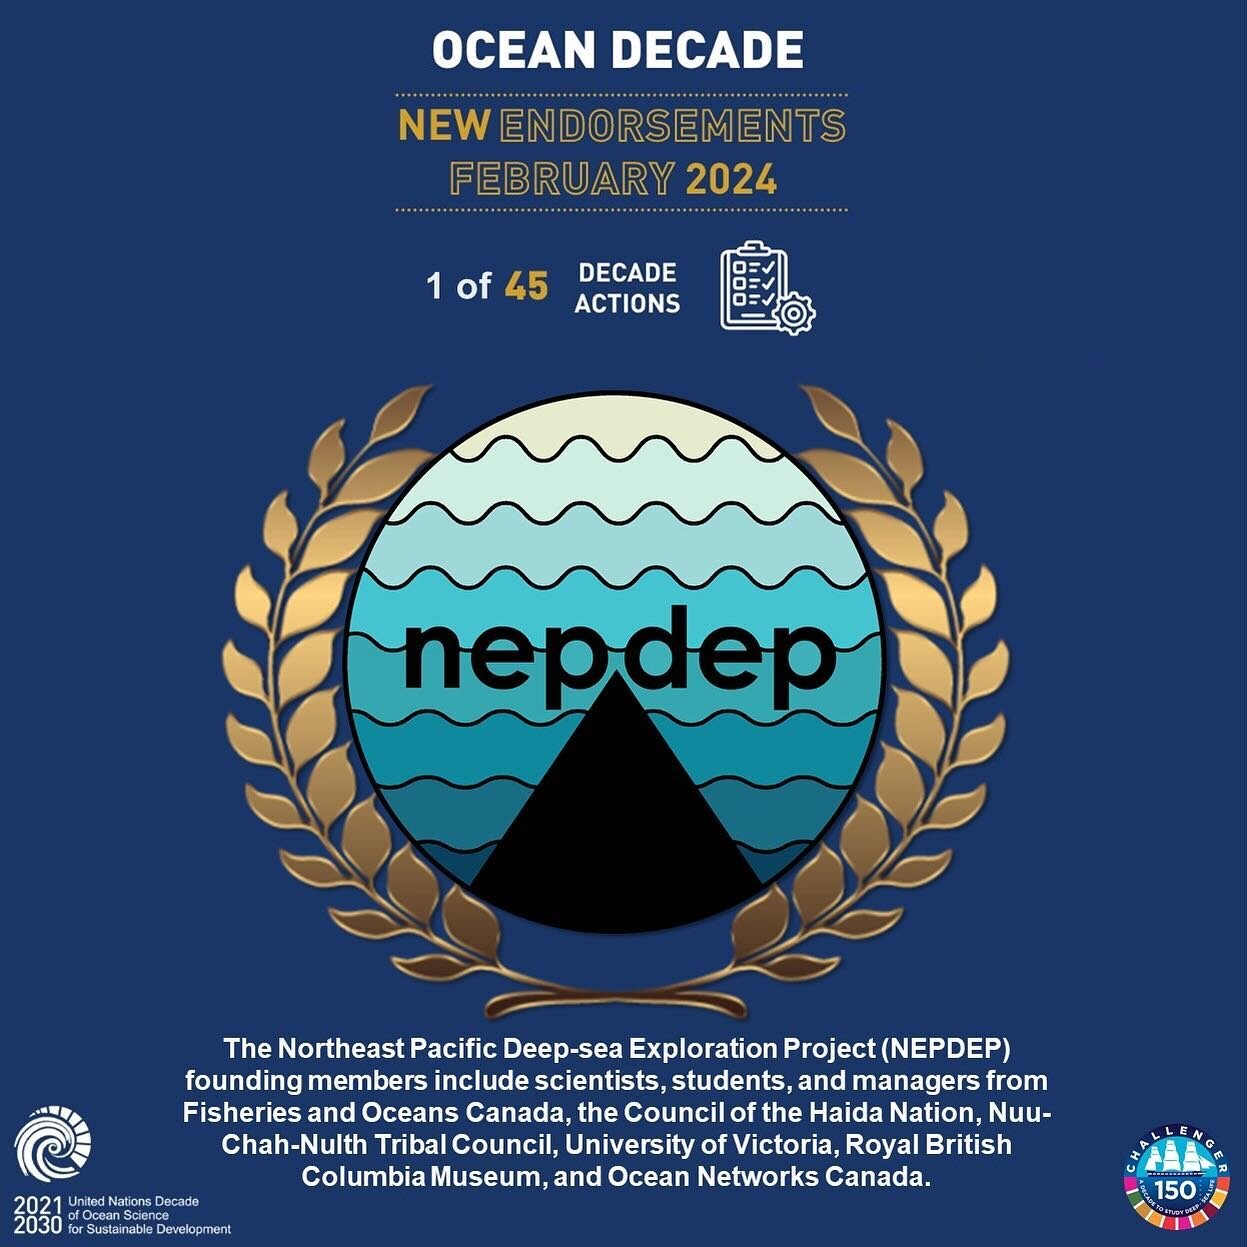 🥳 It&rsquo;s official! Our grassroots #deepsea initiative is part of the United Nations #OceanDecade &amp; Challenger 150 family! 🪸🐙🐳🦀🐟

💙 @fisheriesoceanscan @chn_haidanation @uuathluk @universityofvictoria @royalbcmuseum @ocean_networks #NEP